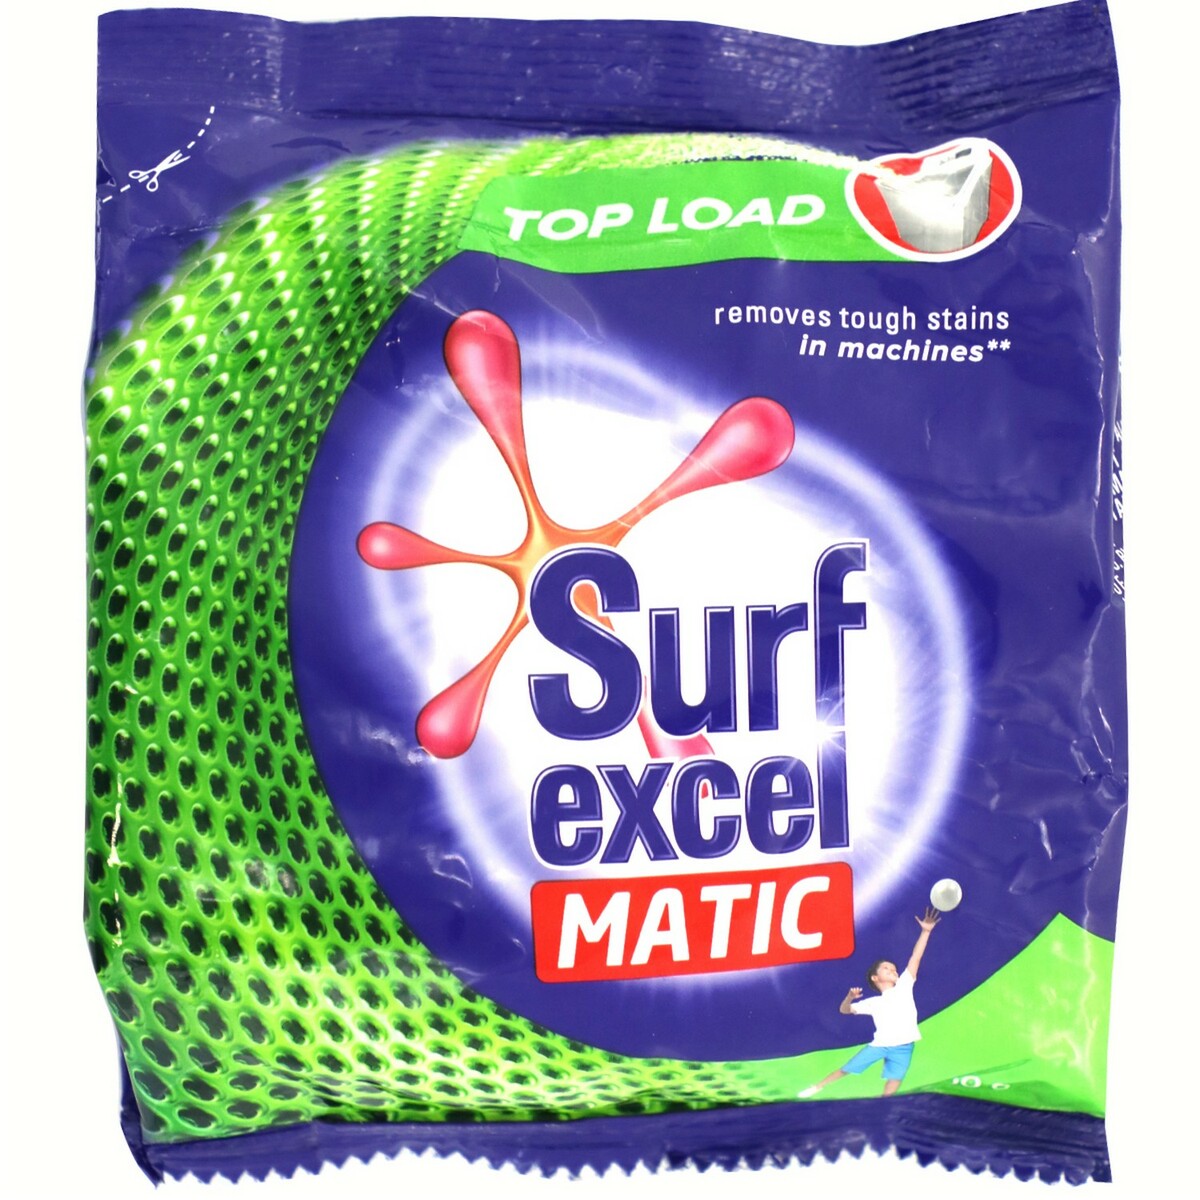 Surf Excel Matic Top Load 500g